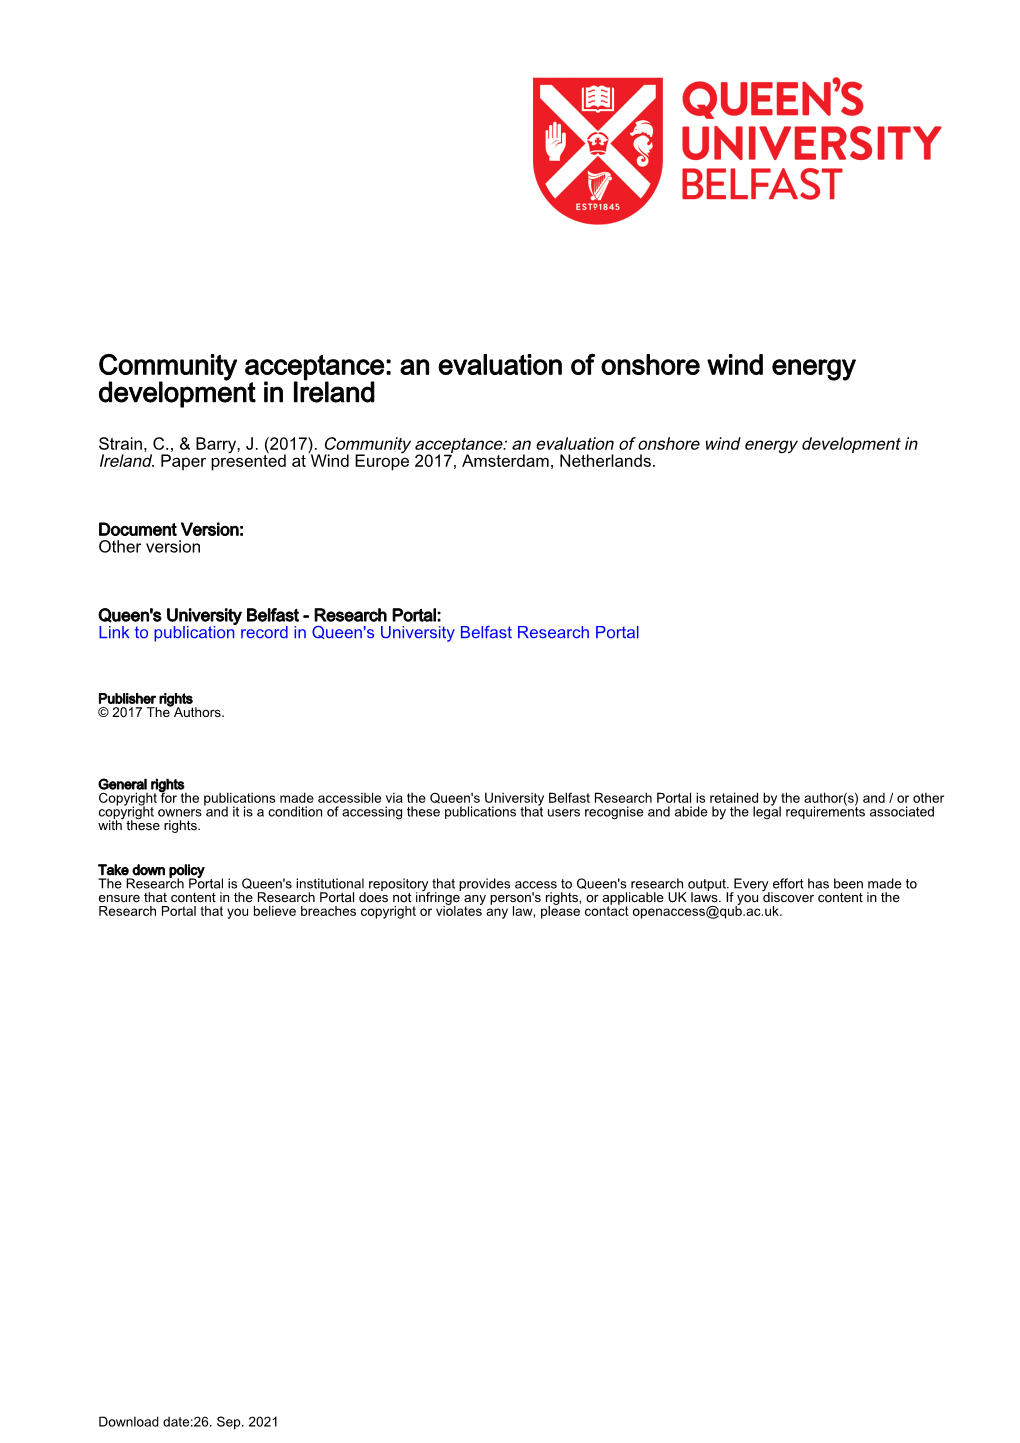 An Evaluation of Onshore Wind Energy Development in Ireland